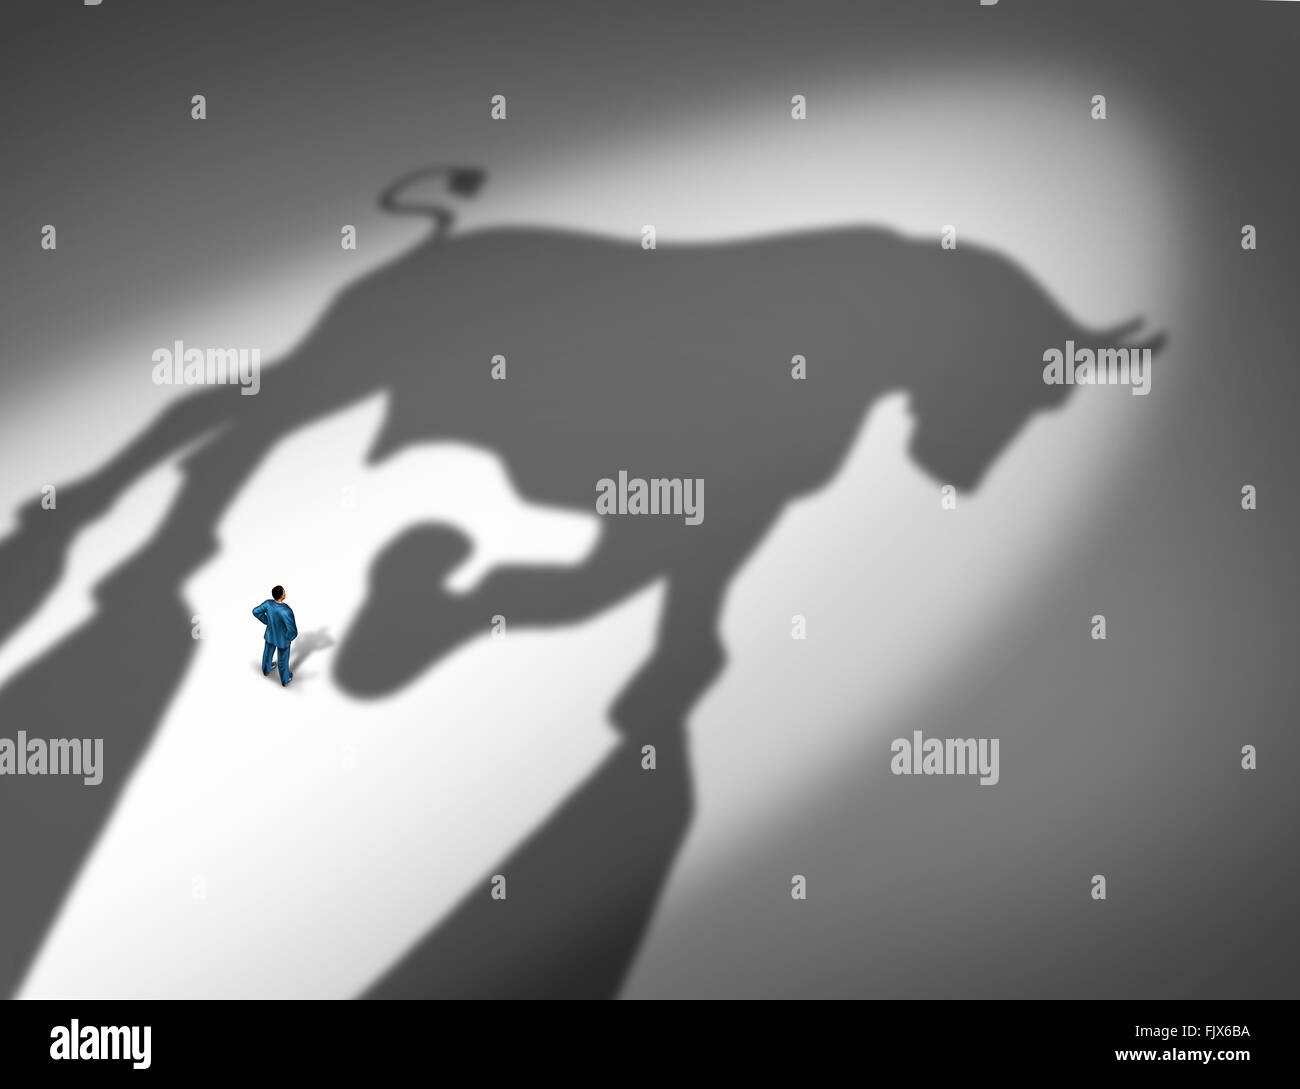 Stock market growth indicator and financial business trend concept as the cast shadow of a bull looming over a businessman as a Stock Photo